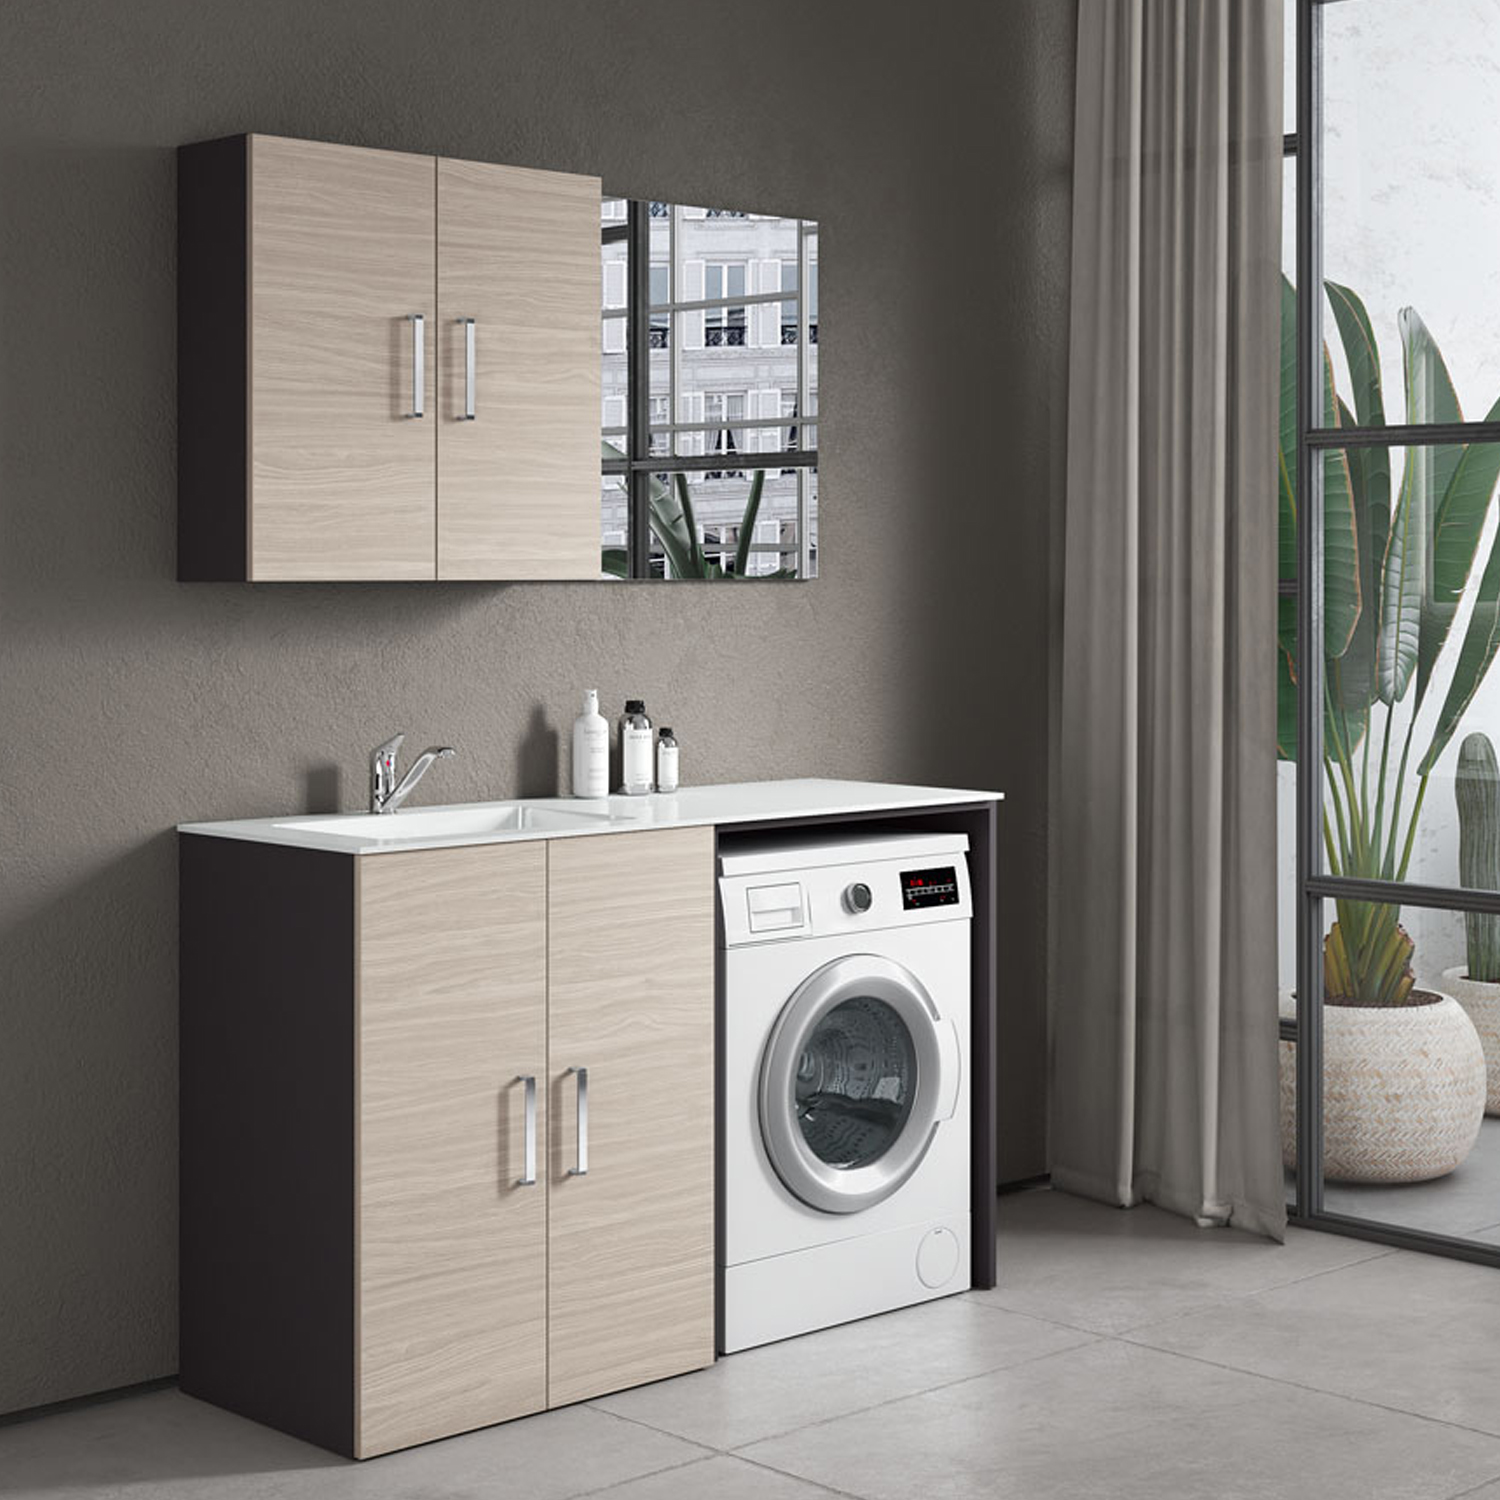 Area51-07 Laundry Furniture Composition with sink, washing machine module  and wall unit - Olmo Rousseau